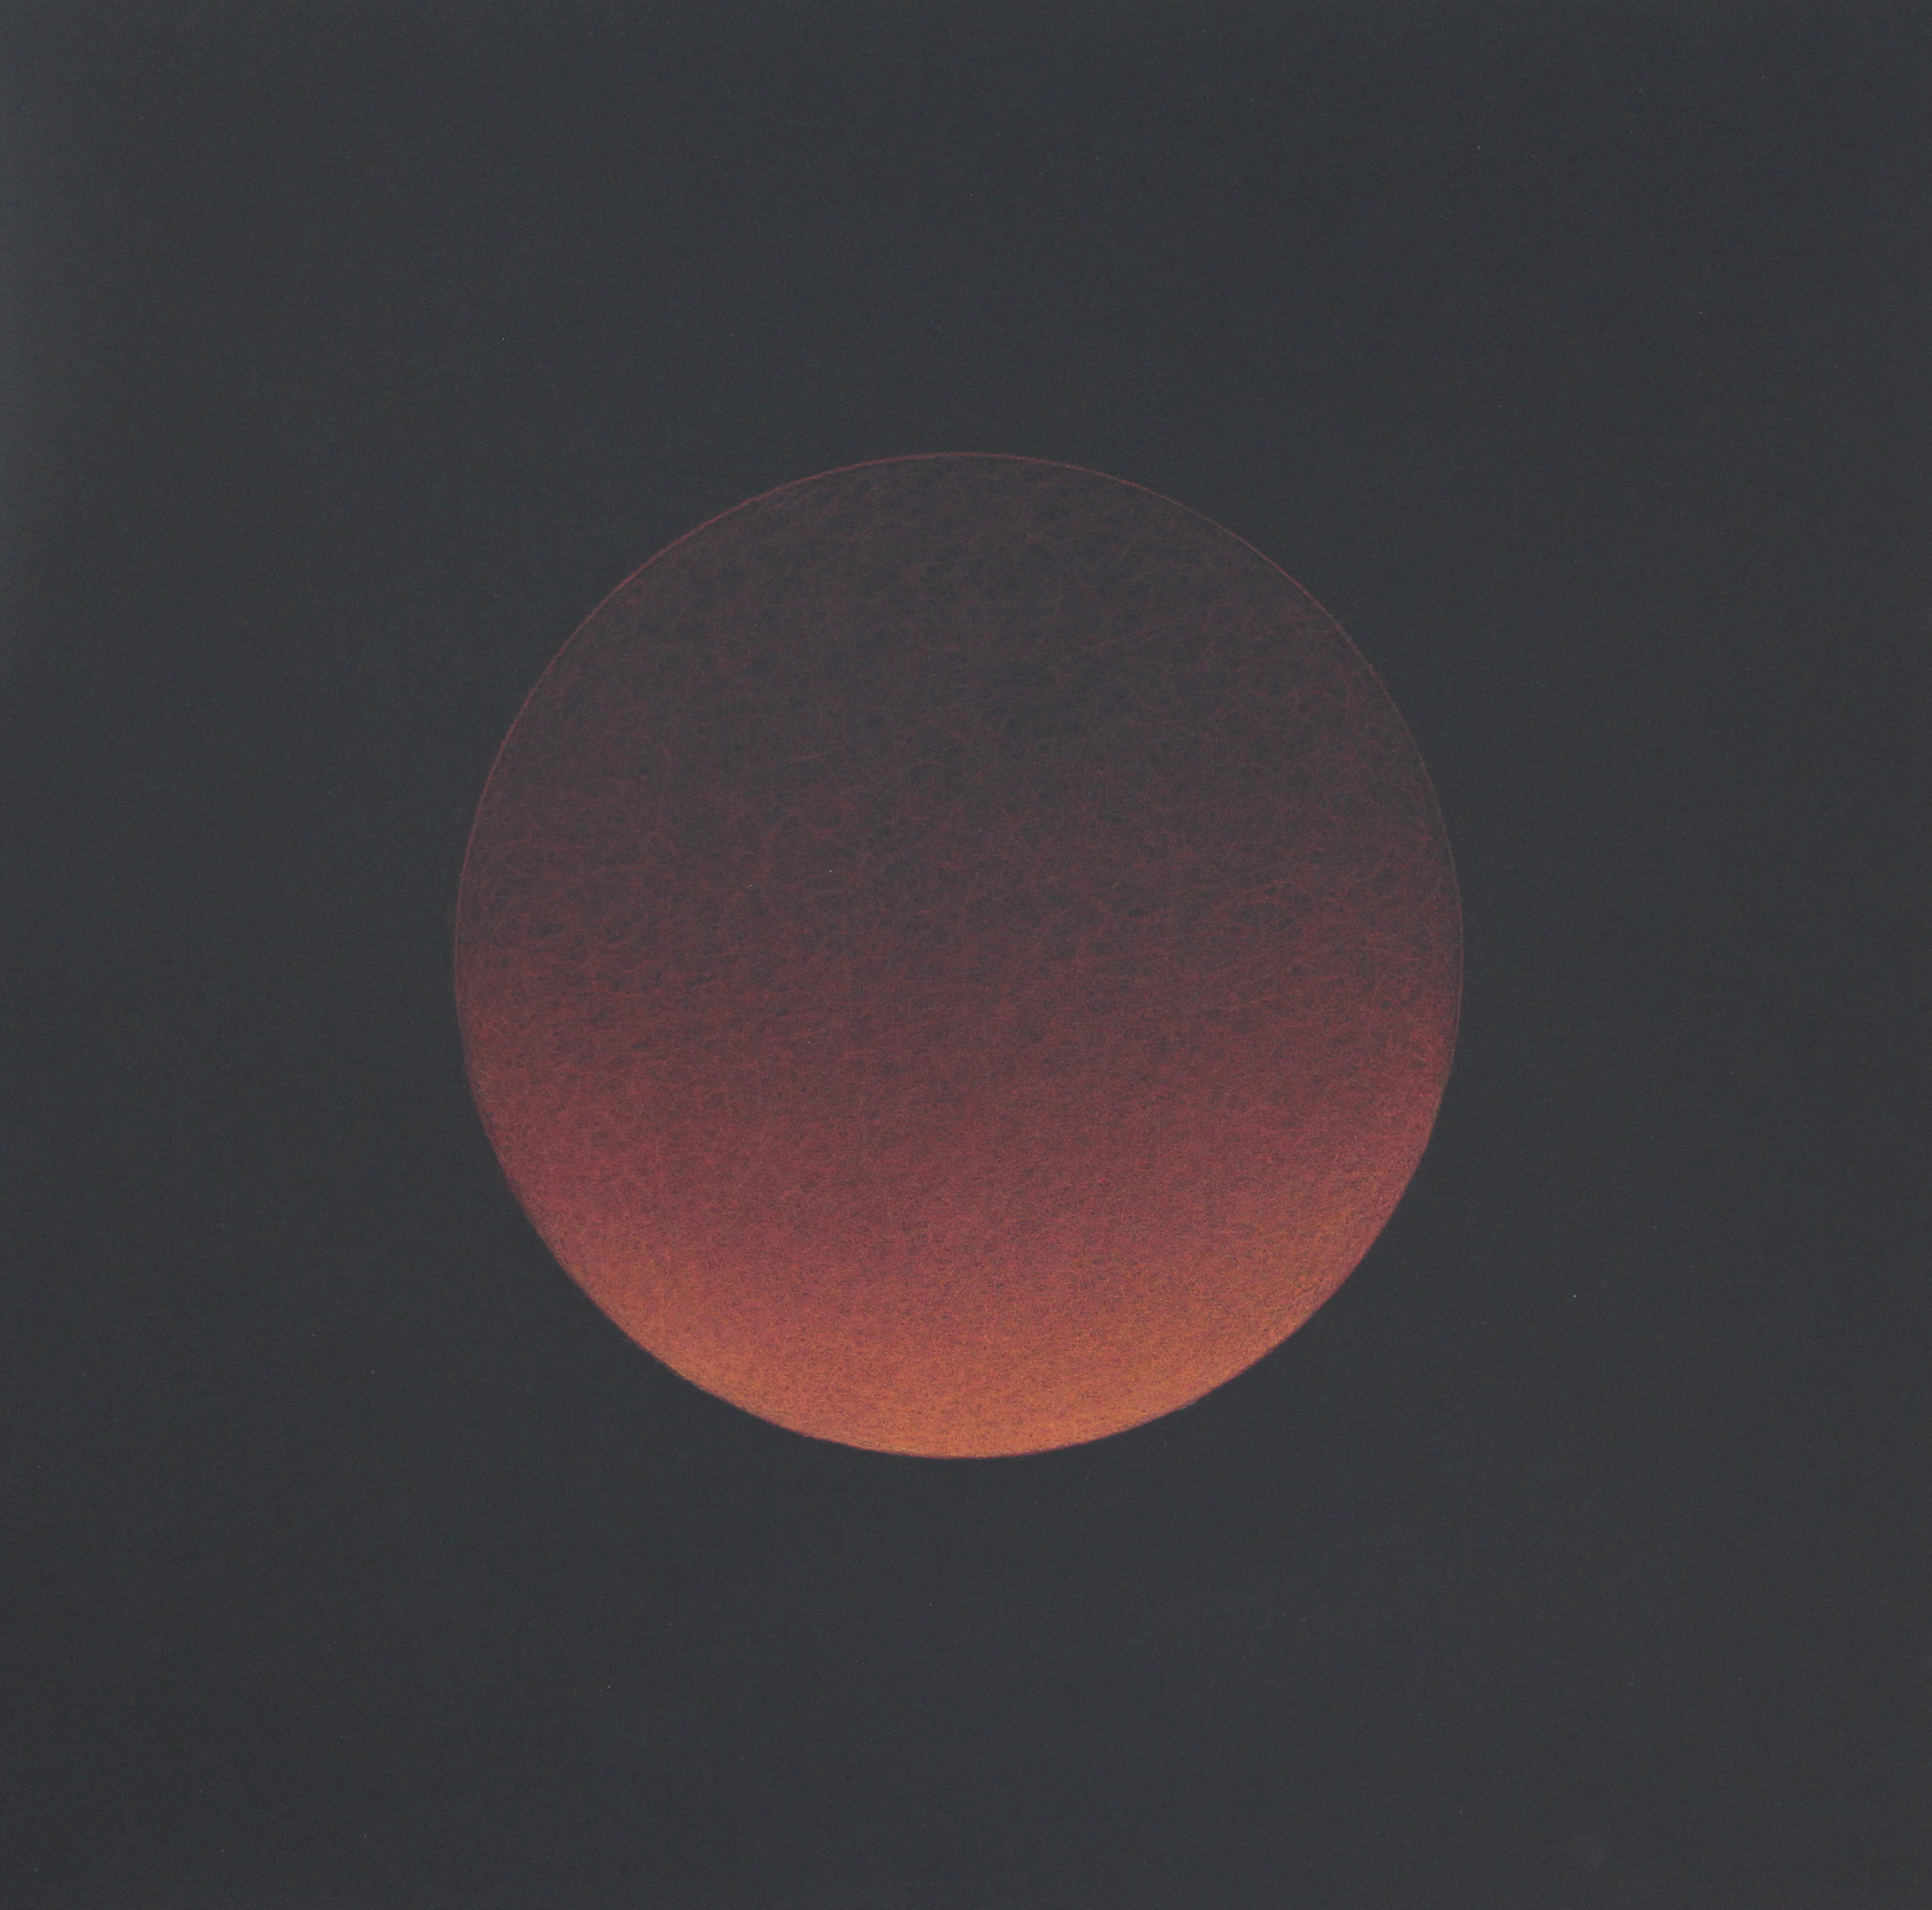 Red Sphere 7
2021, colored pencil on museum board, 20 x 20""